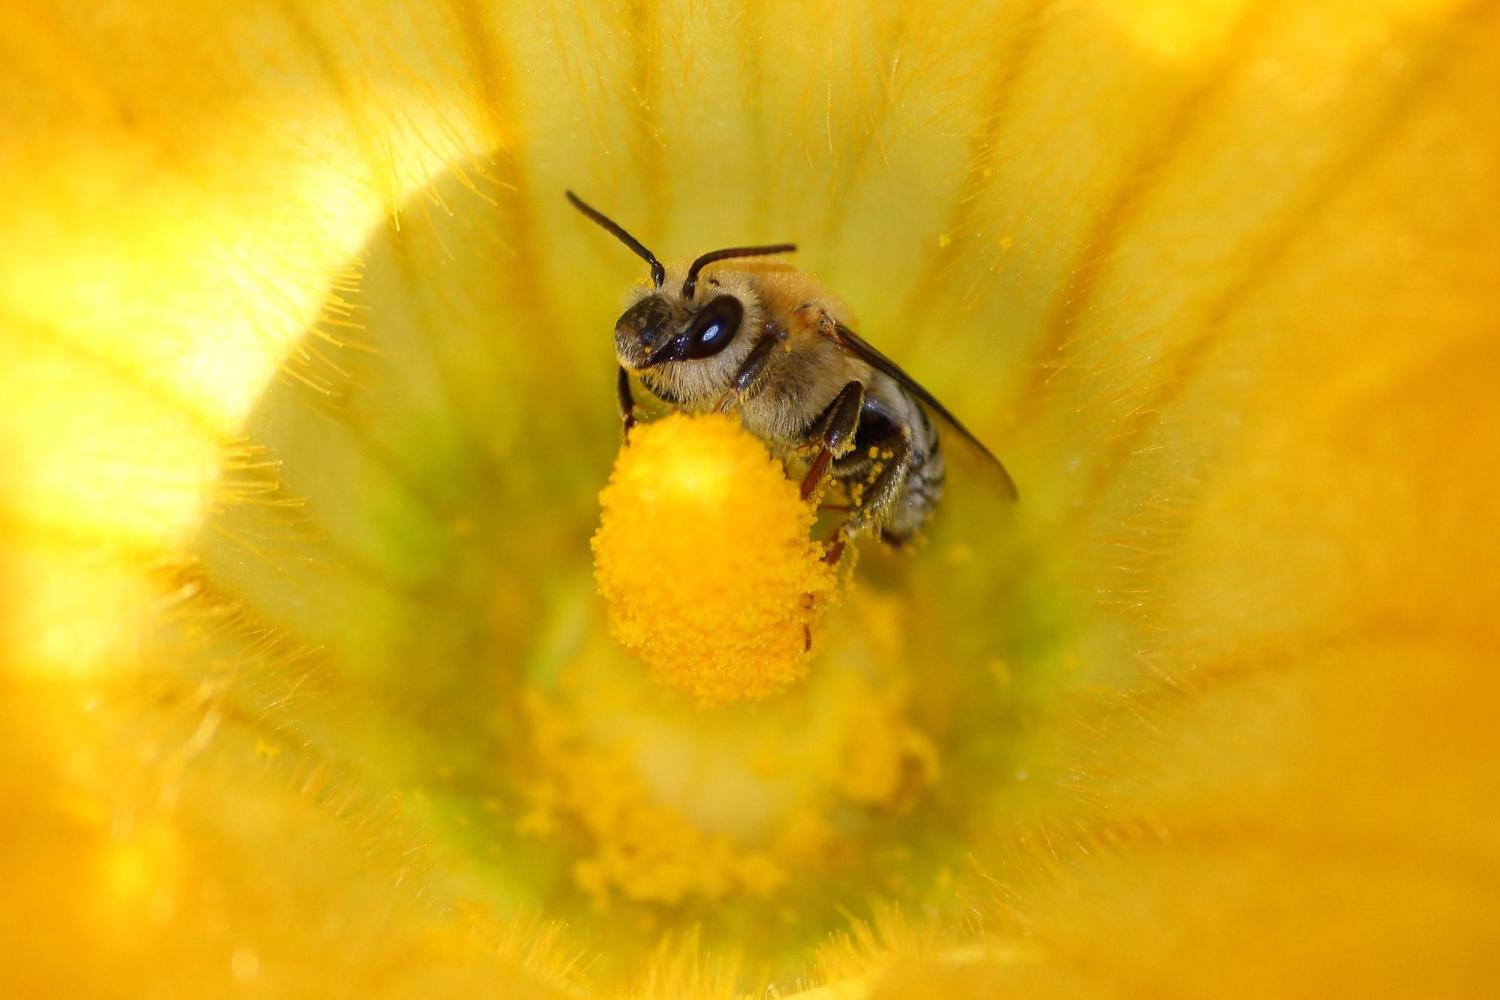 A Squash bee on a flower